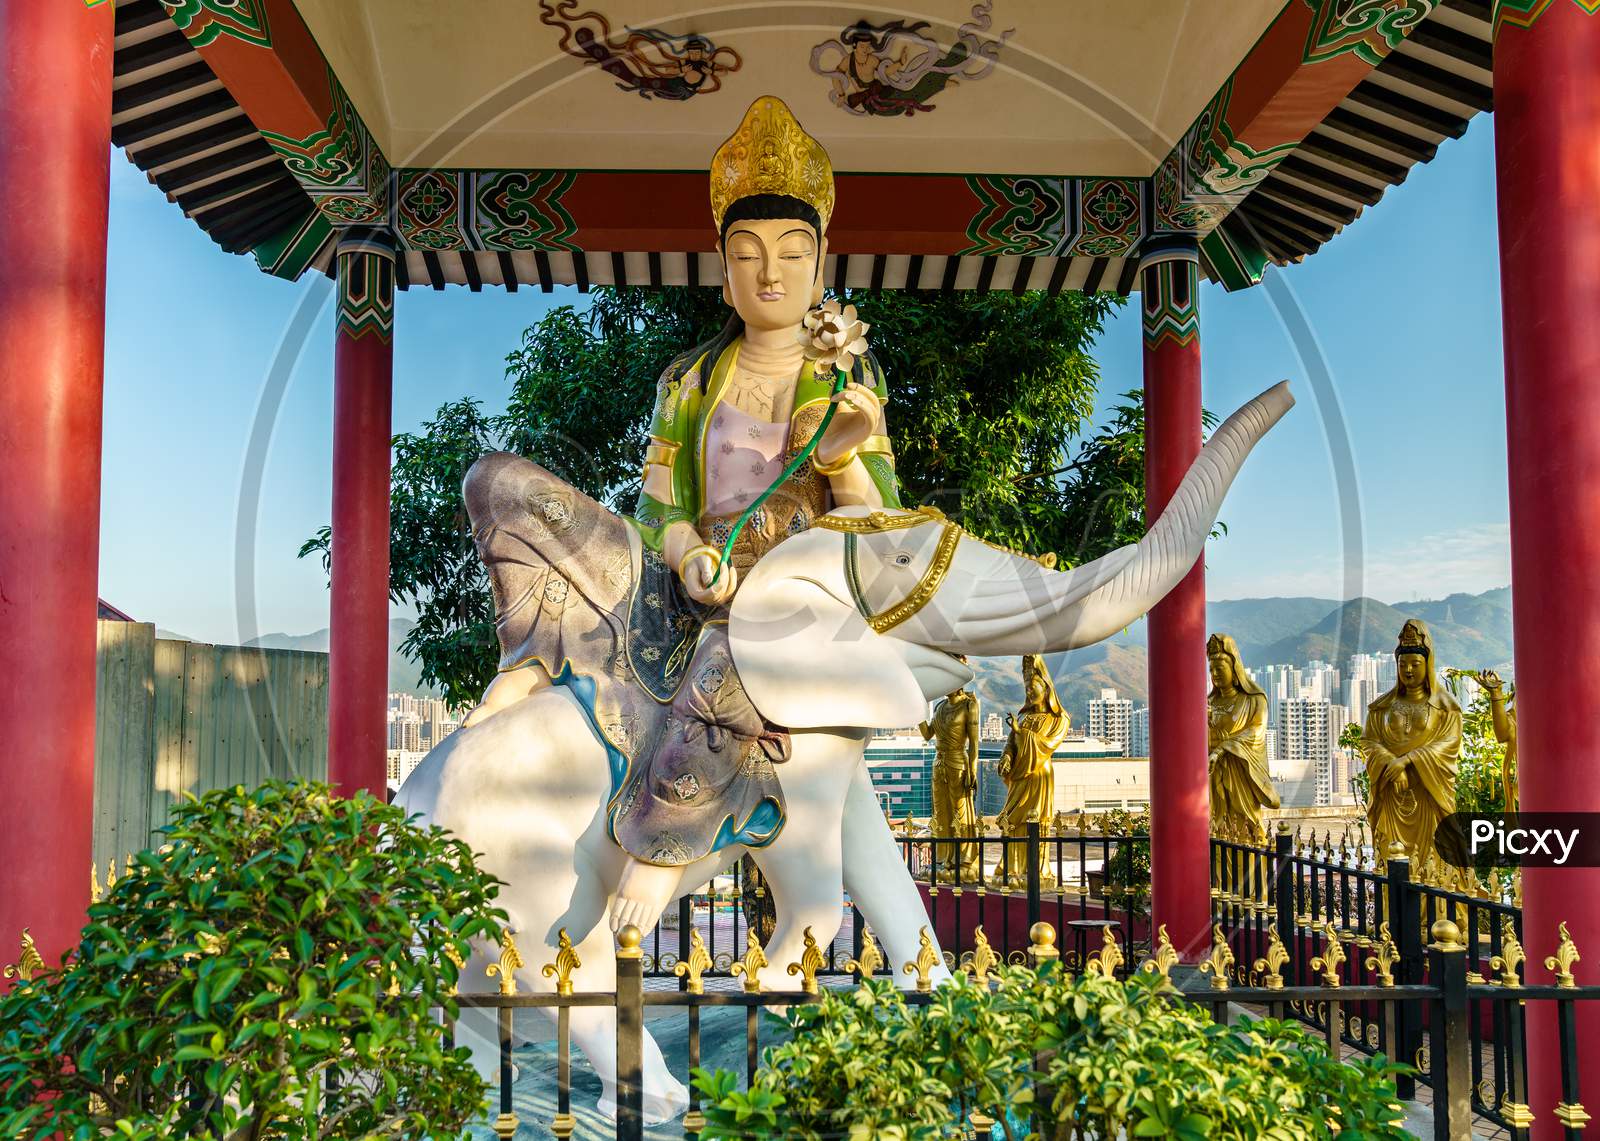 Pavilion At The Ten Thousand Buddhas Monastery In Hong Kong